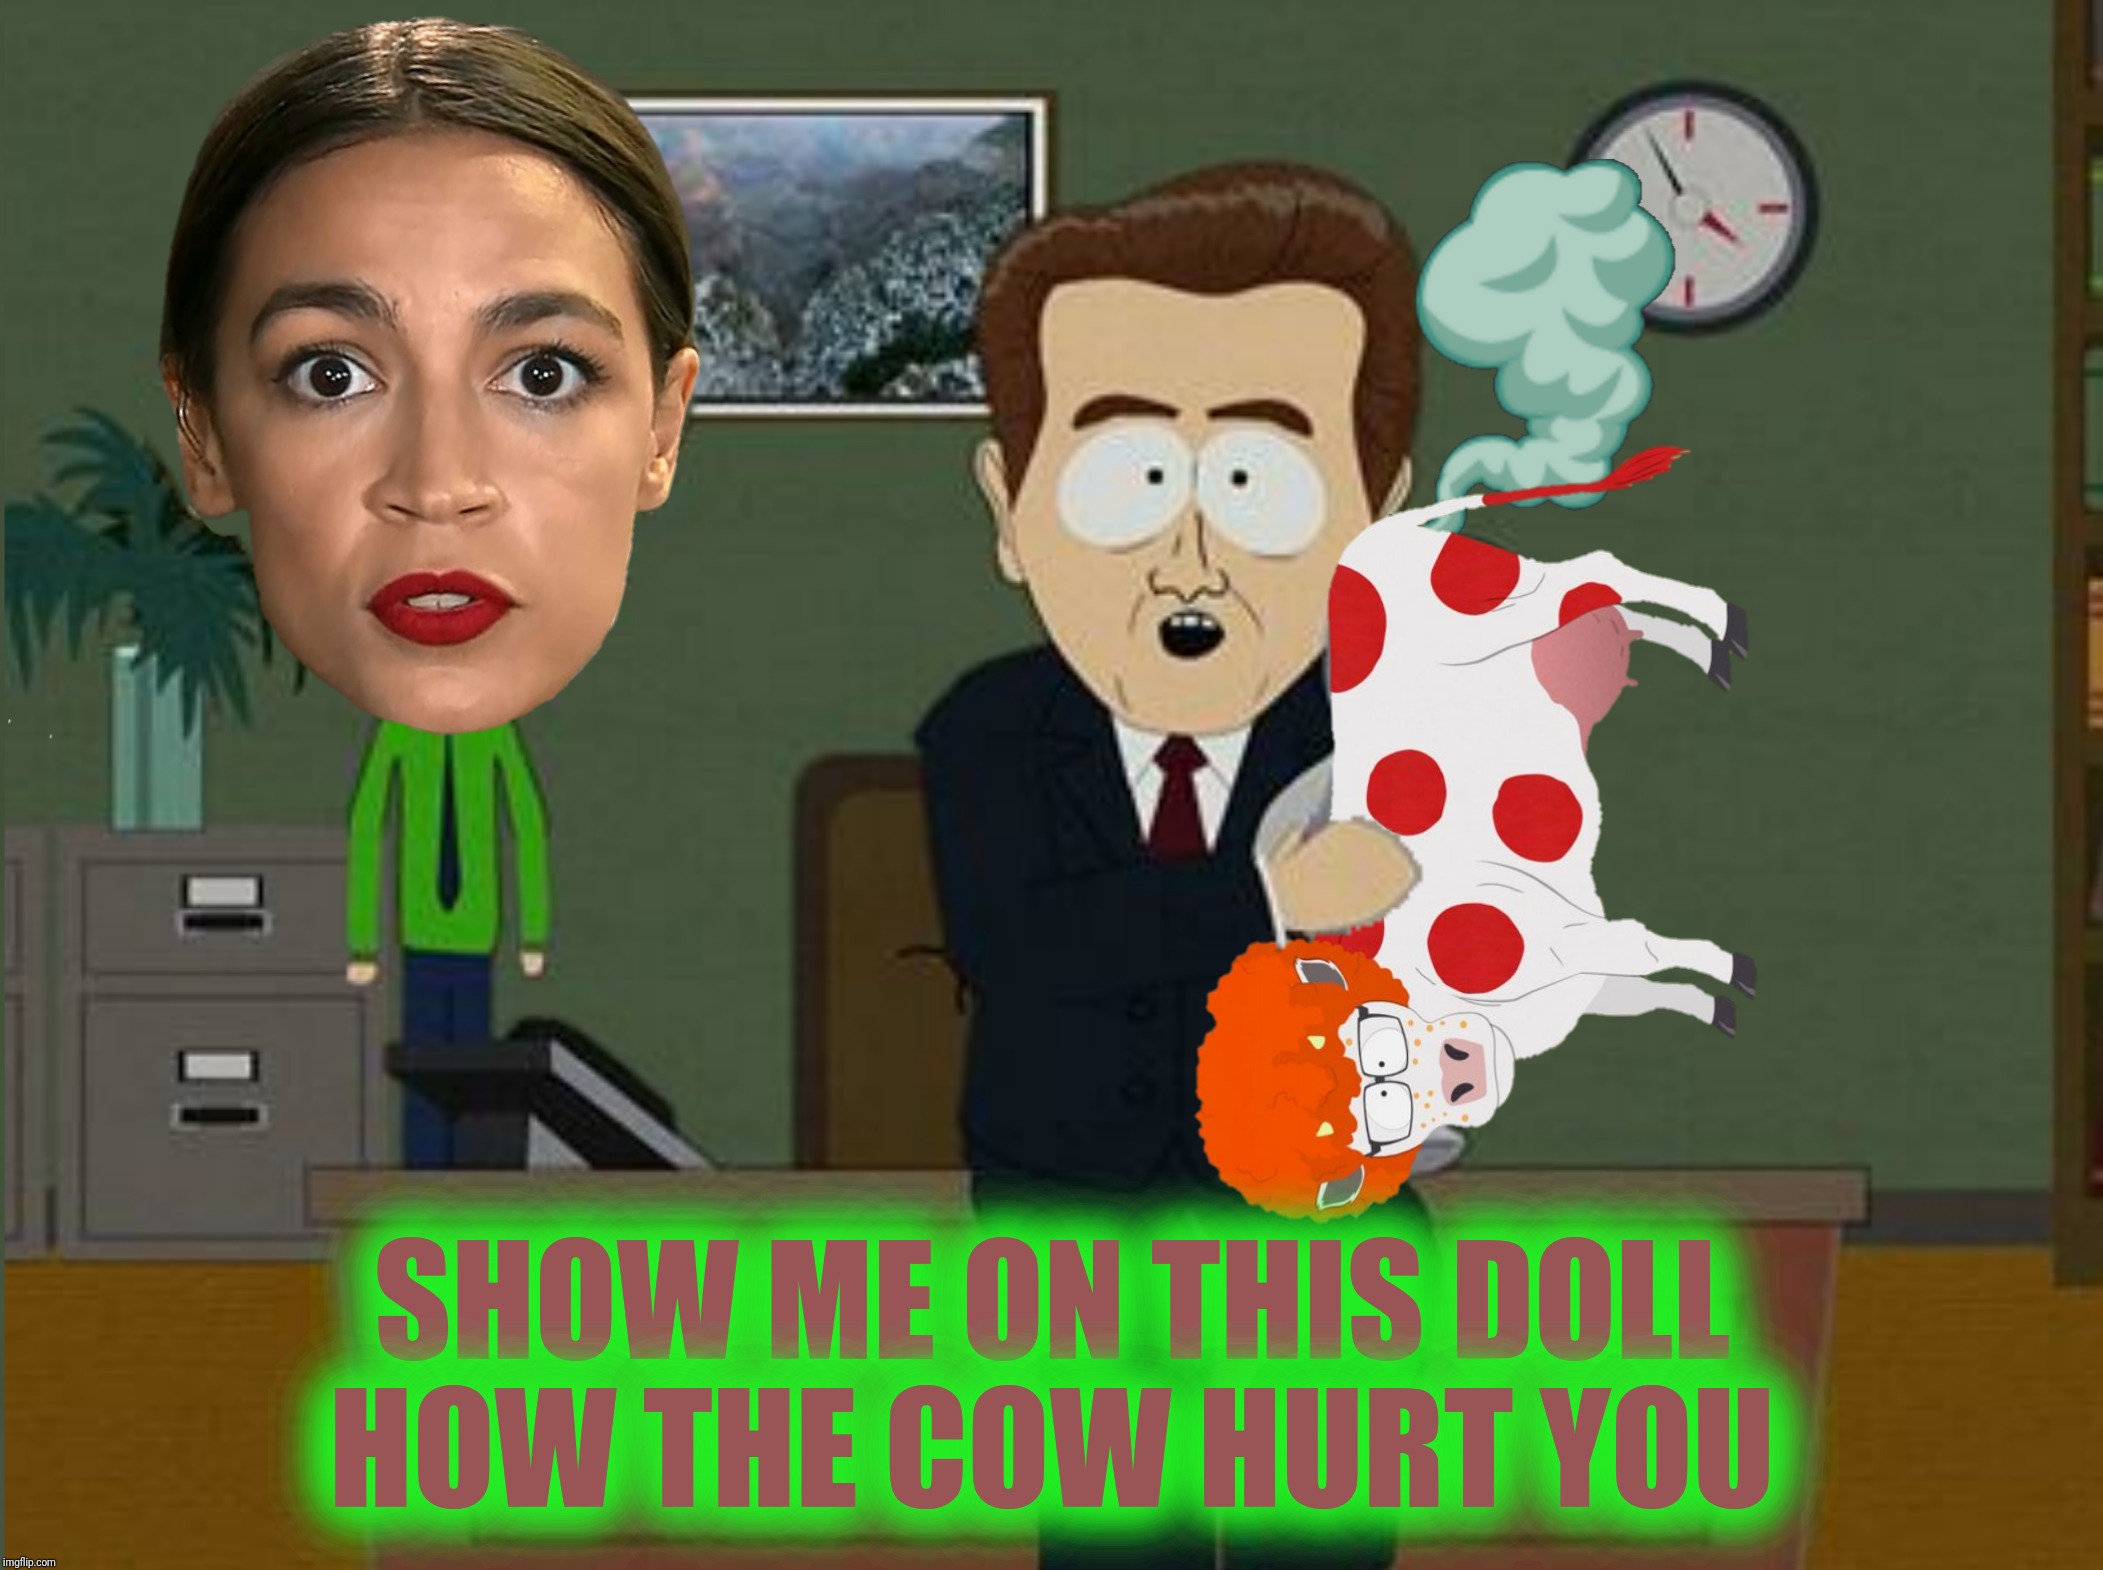 Bad Photoshop Sunday presents:  Alexandria oGASio-Cortez, The queen of the cow farts | SHOW ME ON THIS DOLL HOW THE COW HURT YOU | image tagged in bad photoshop sunday,south park,cow farts,green new deal,alexandria ocasio-cortez | made w/ Imgflip meme maker